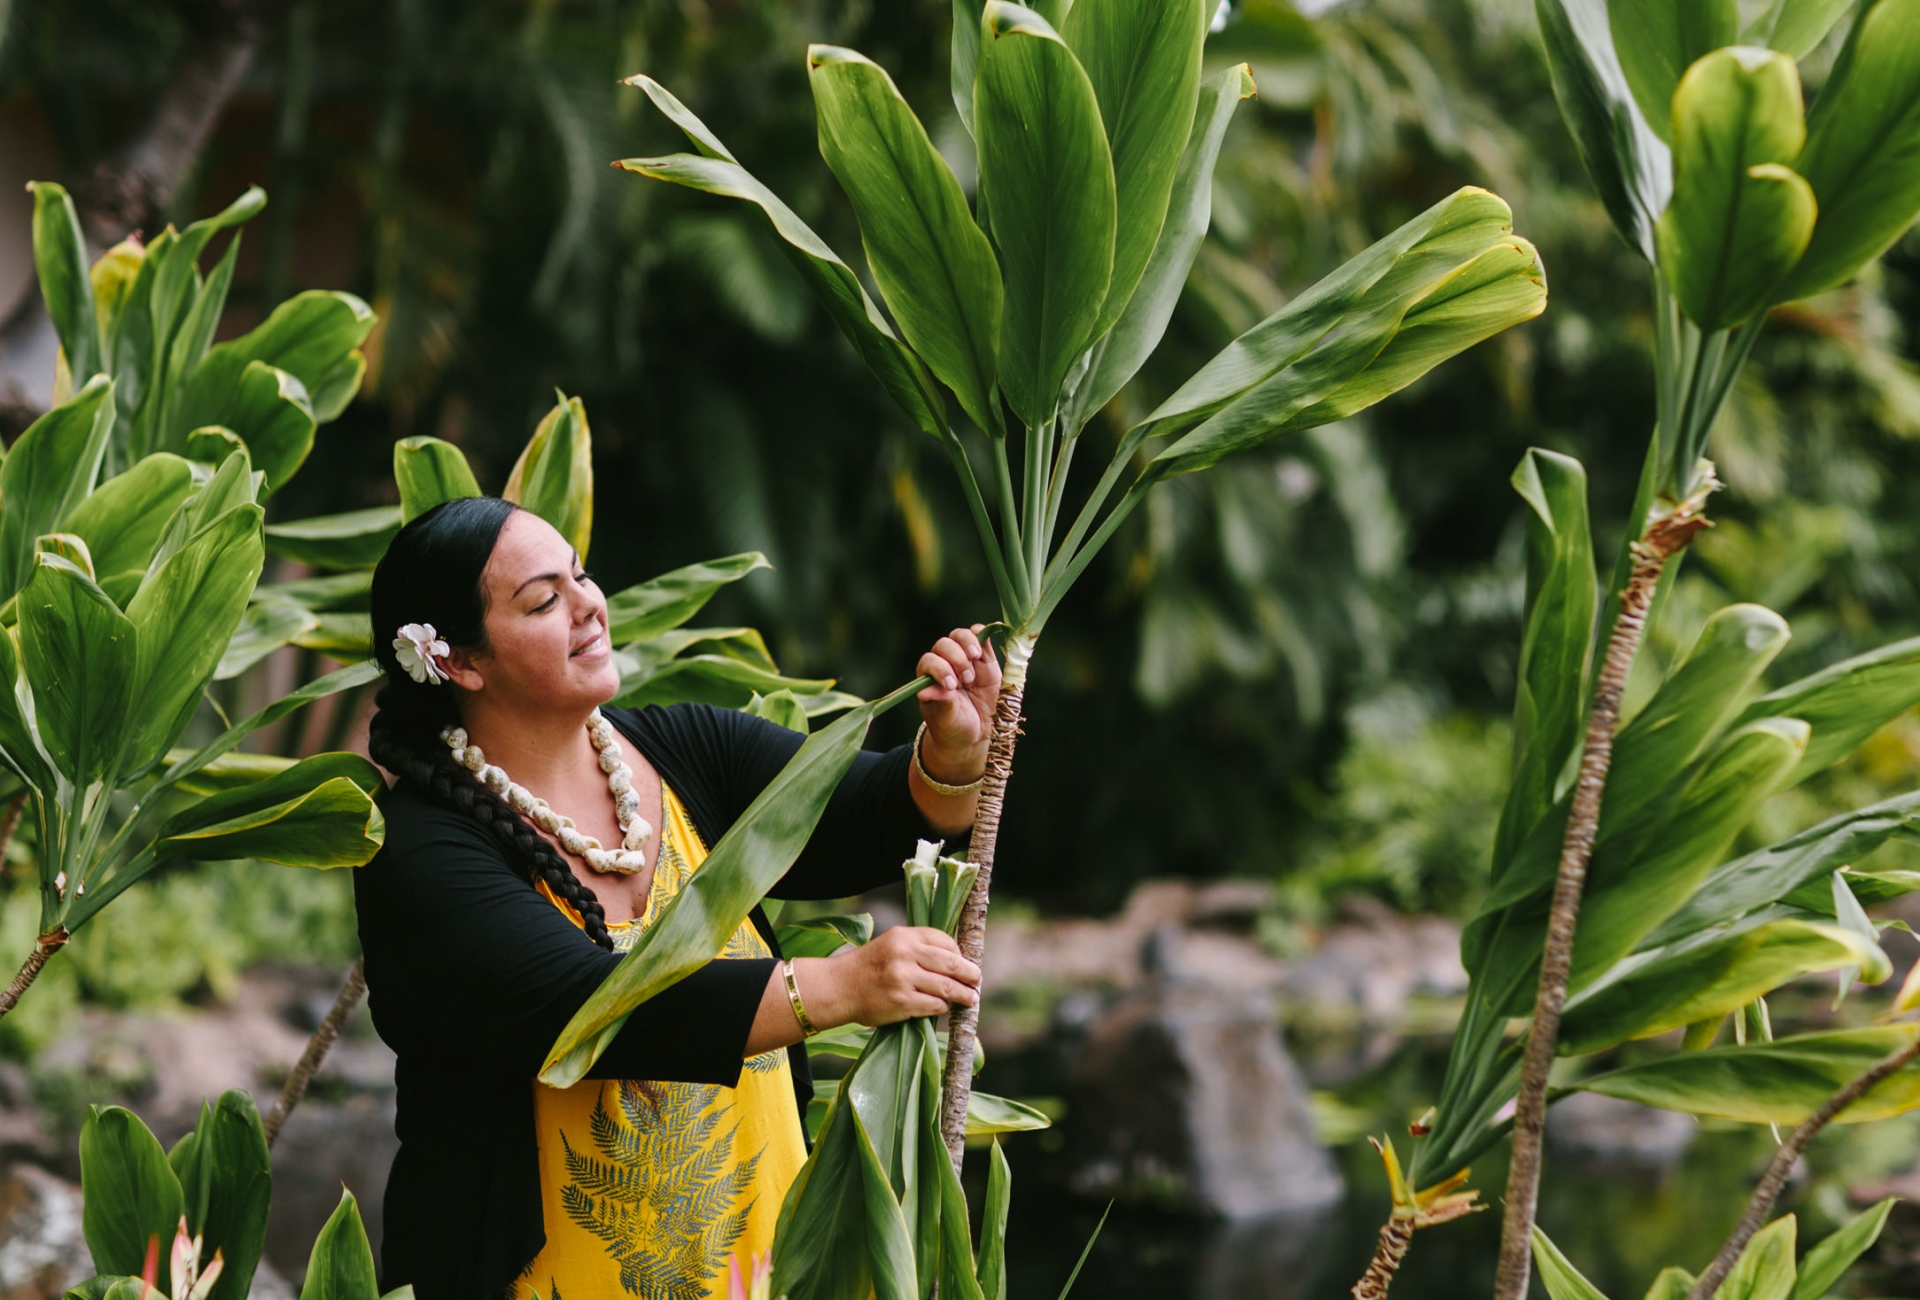 A woman dressed in yellow pulls a long leaf away from the plant 